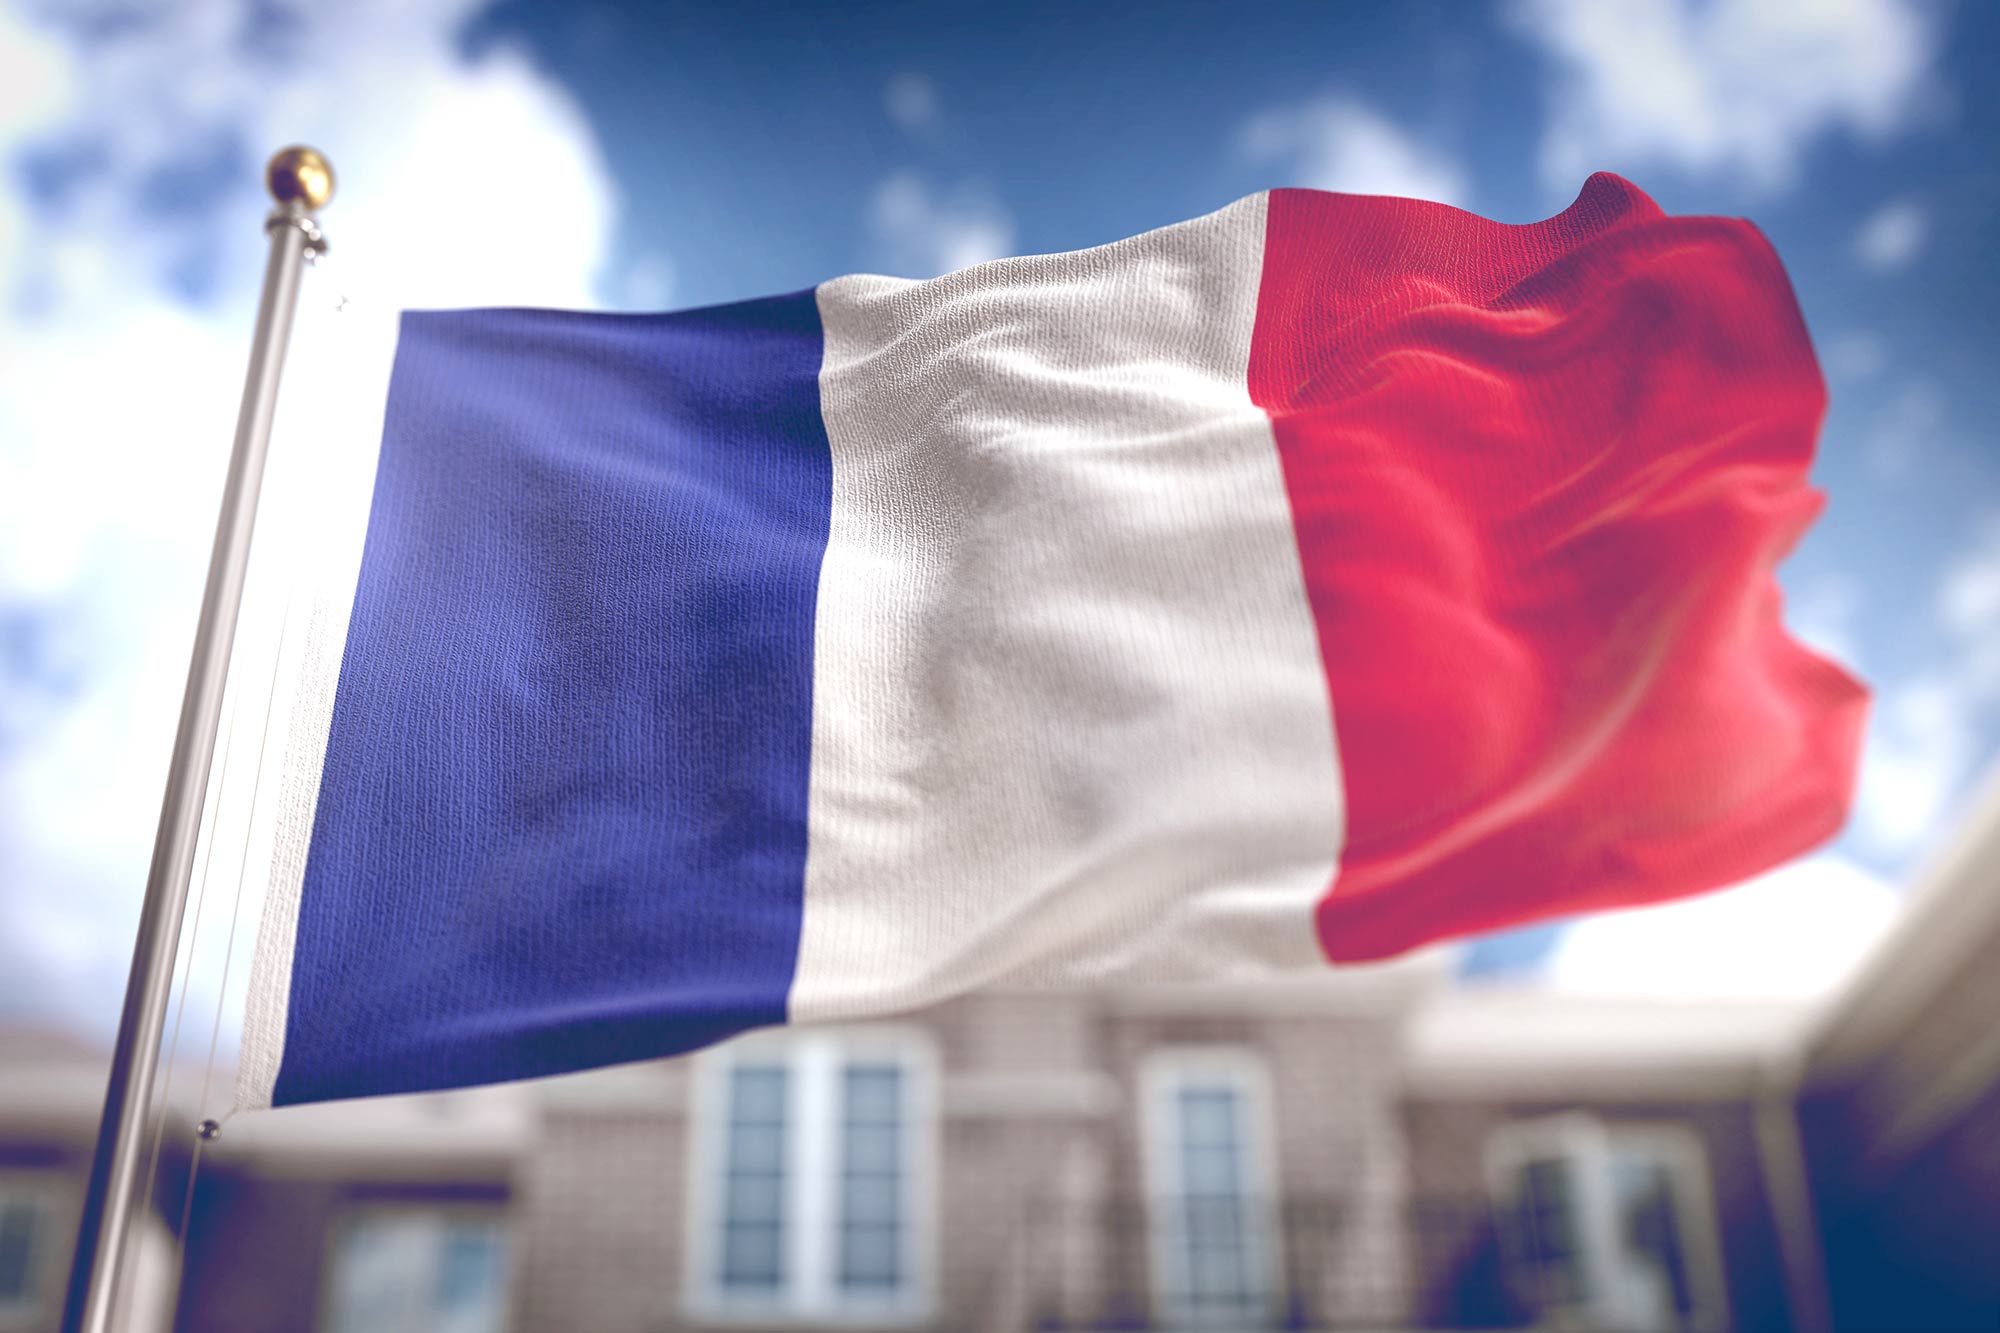 French flag blowing in the wind